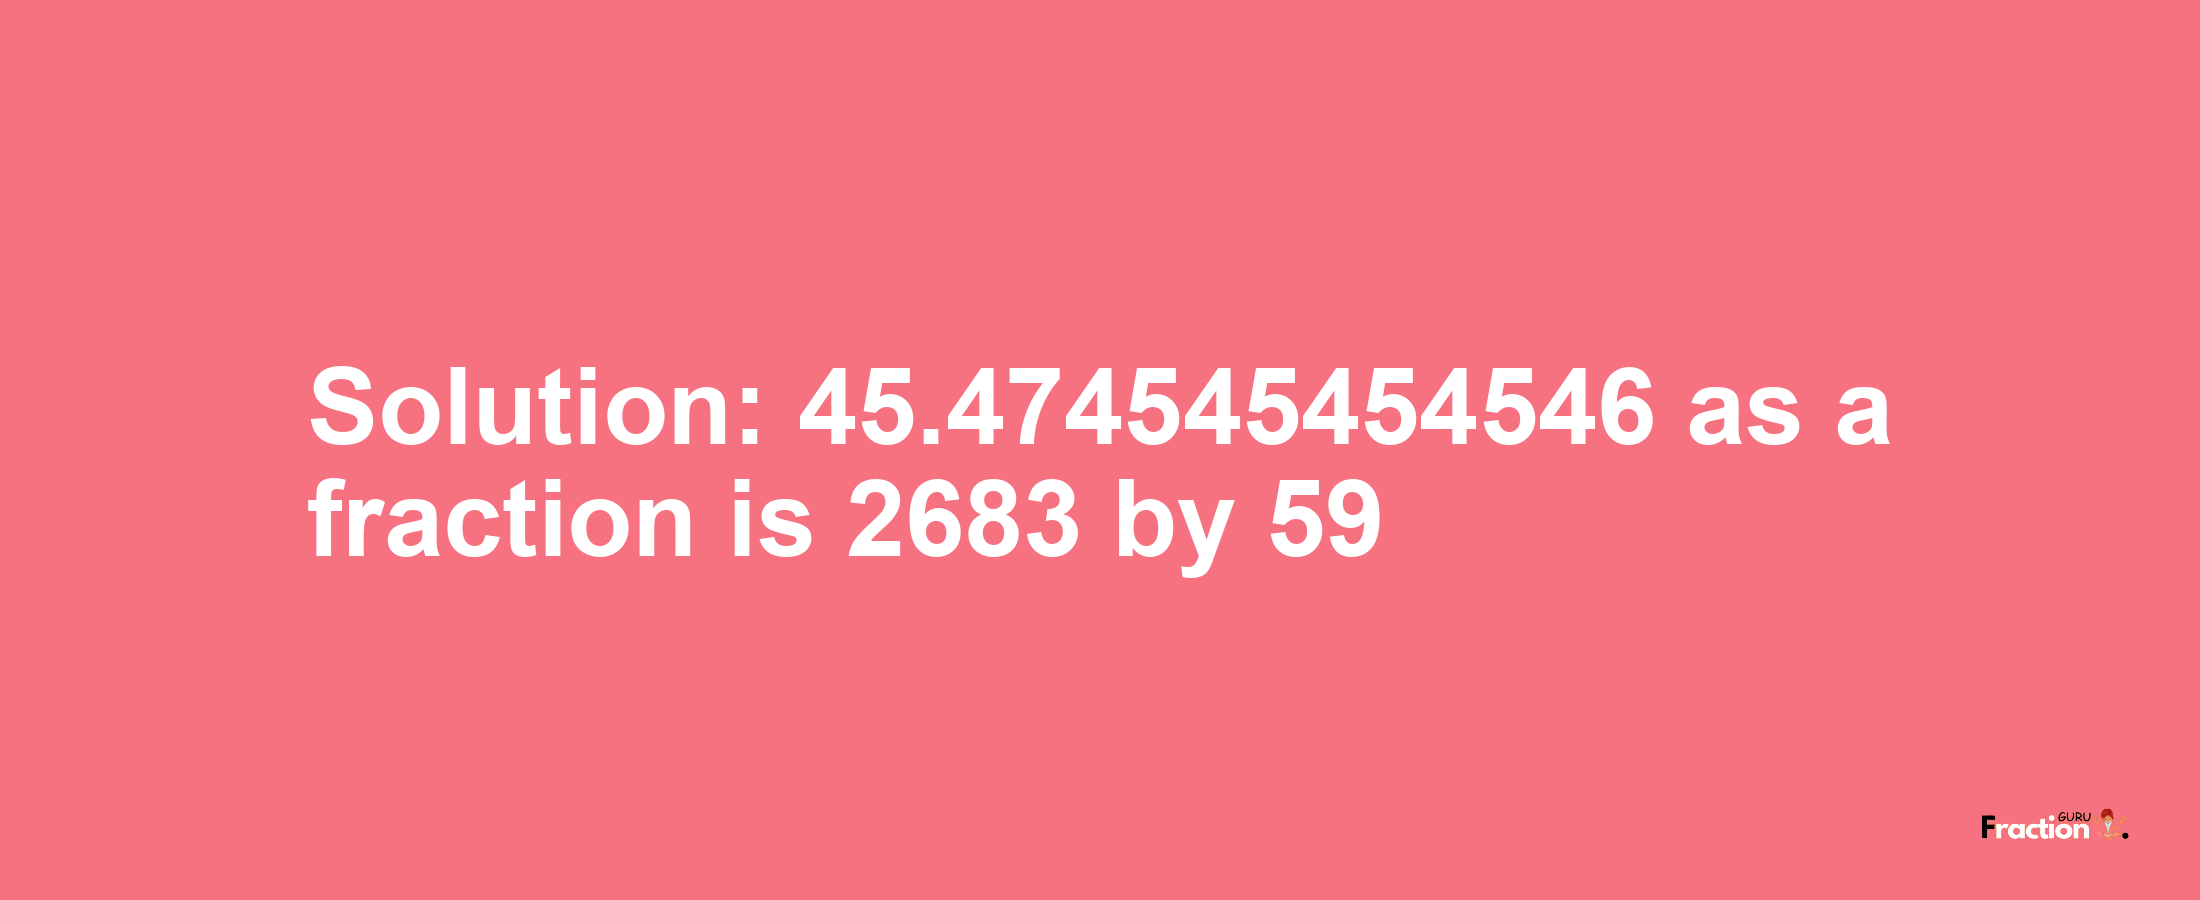 Solution:45.474545454546 as a fraction is 2683/59